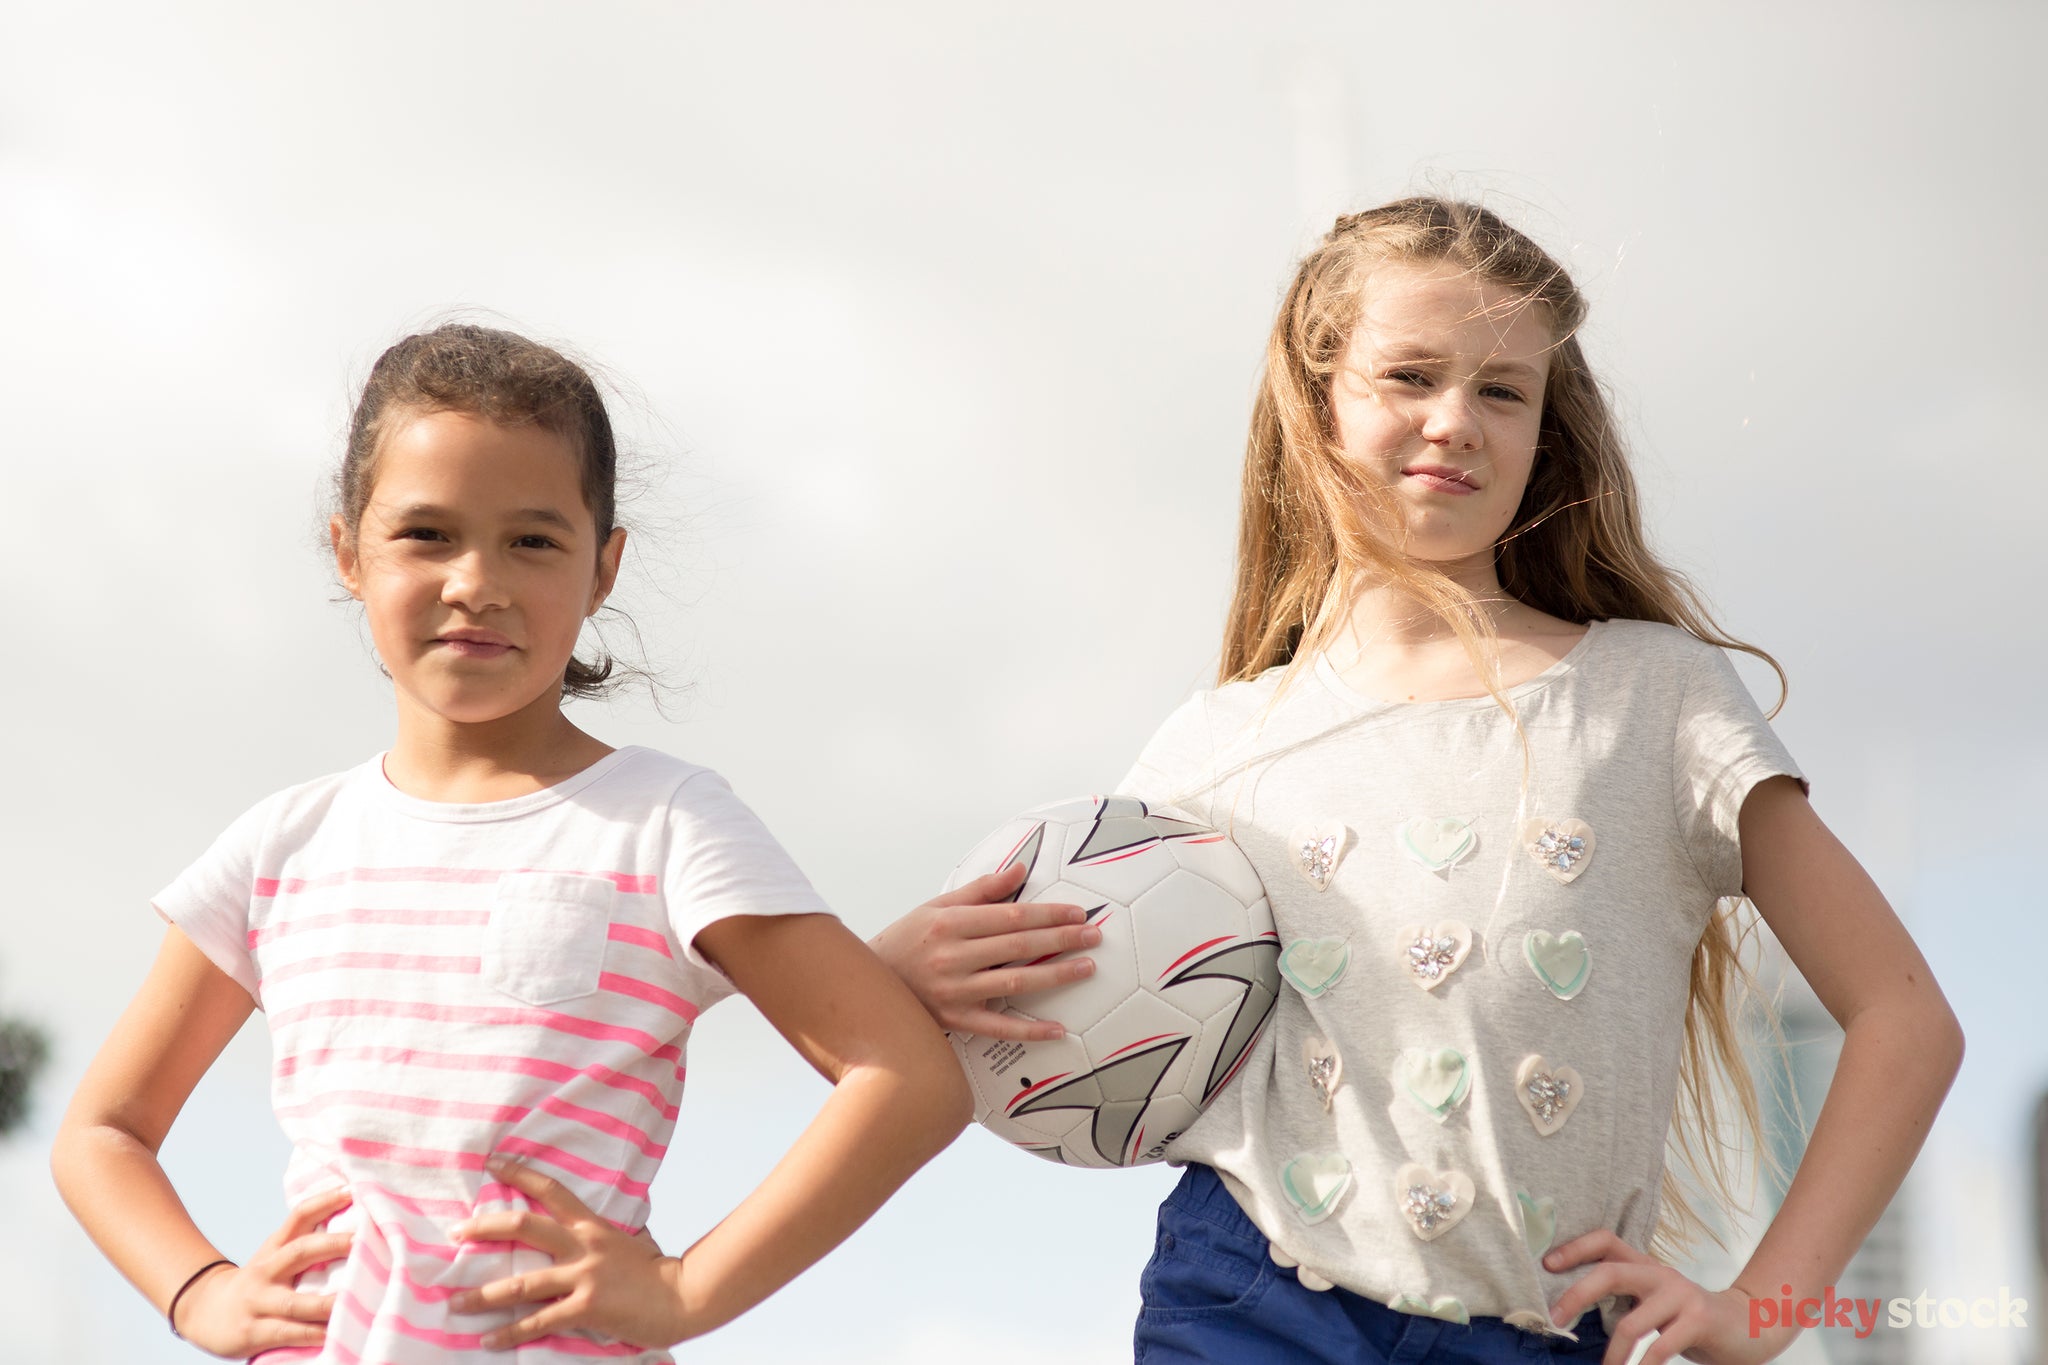 Landscape close-up of two young girls looking confidently to camera, hands on hips, one with ball in hand. 